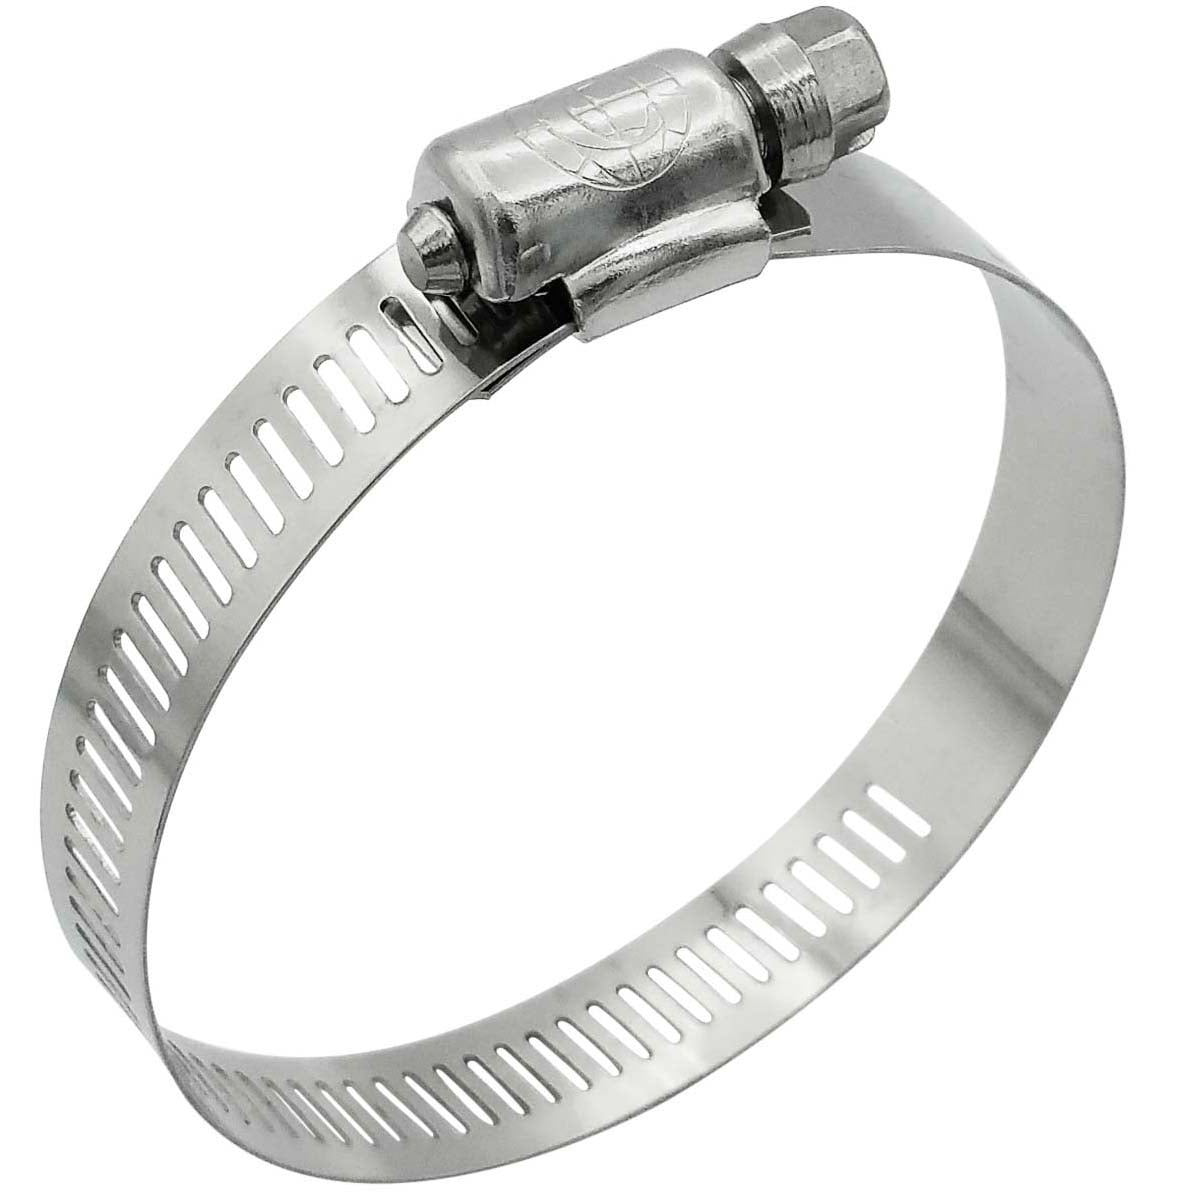 AIPRODA Micro Hose Clamp Adjustable 304 Stainless Steel Duct Clamps,Worm Gear Adjustable Hose Clamp 27-51mm Pack of 6